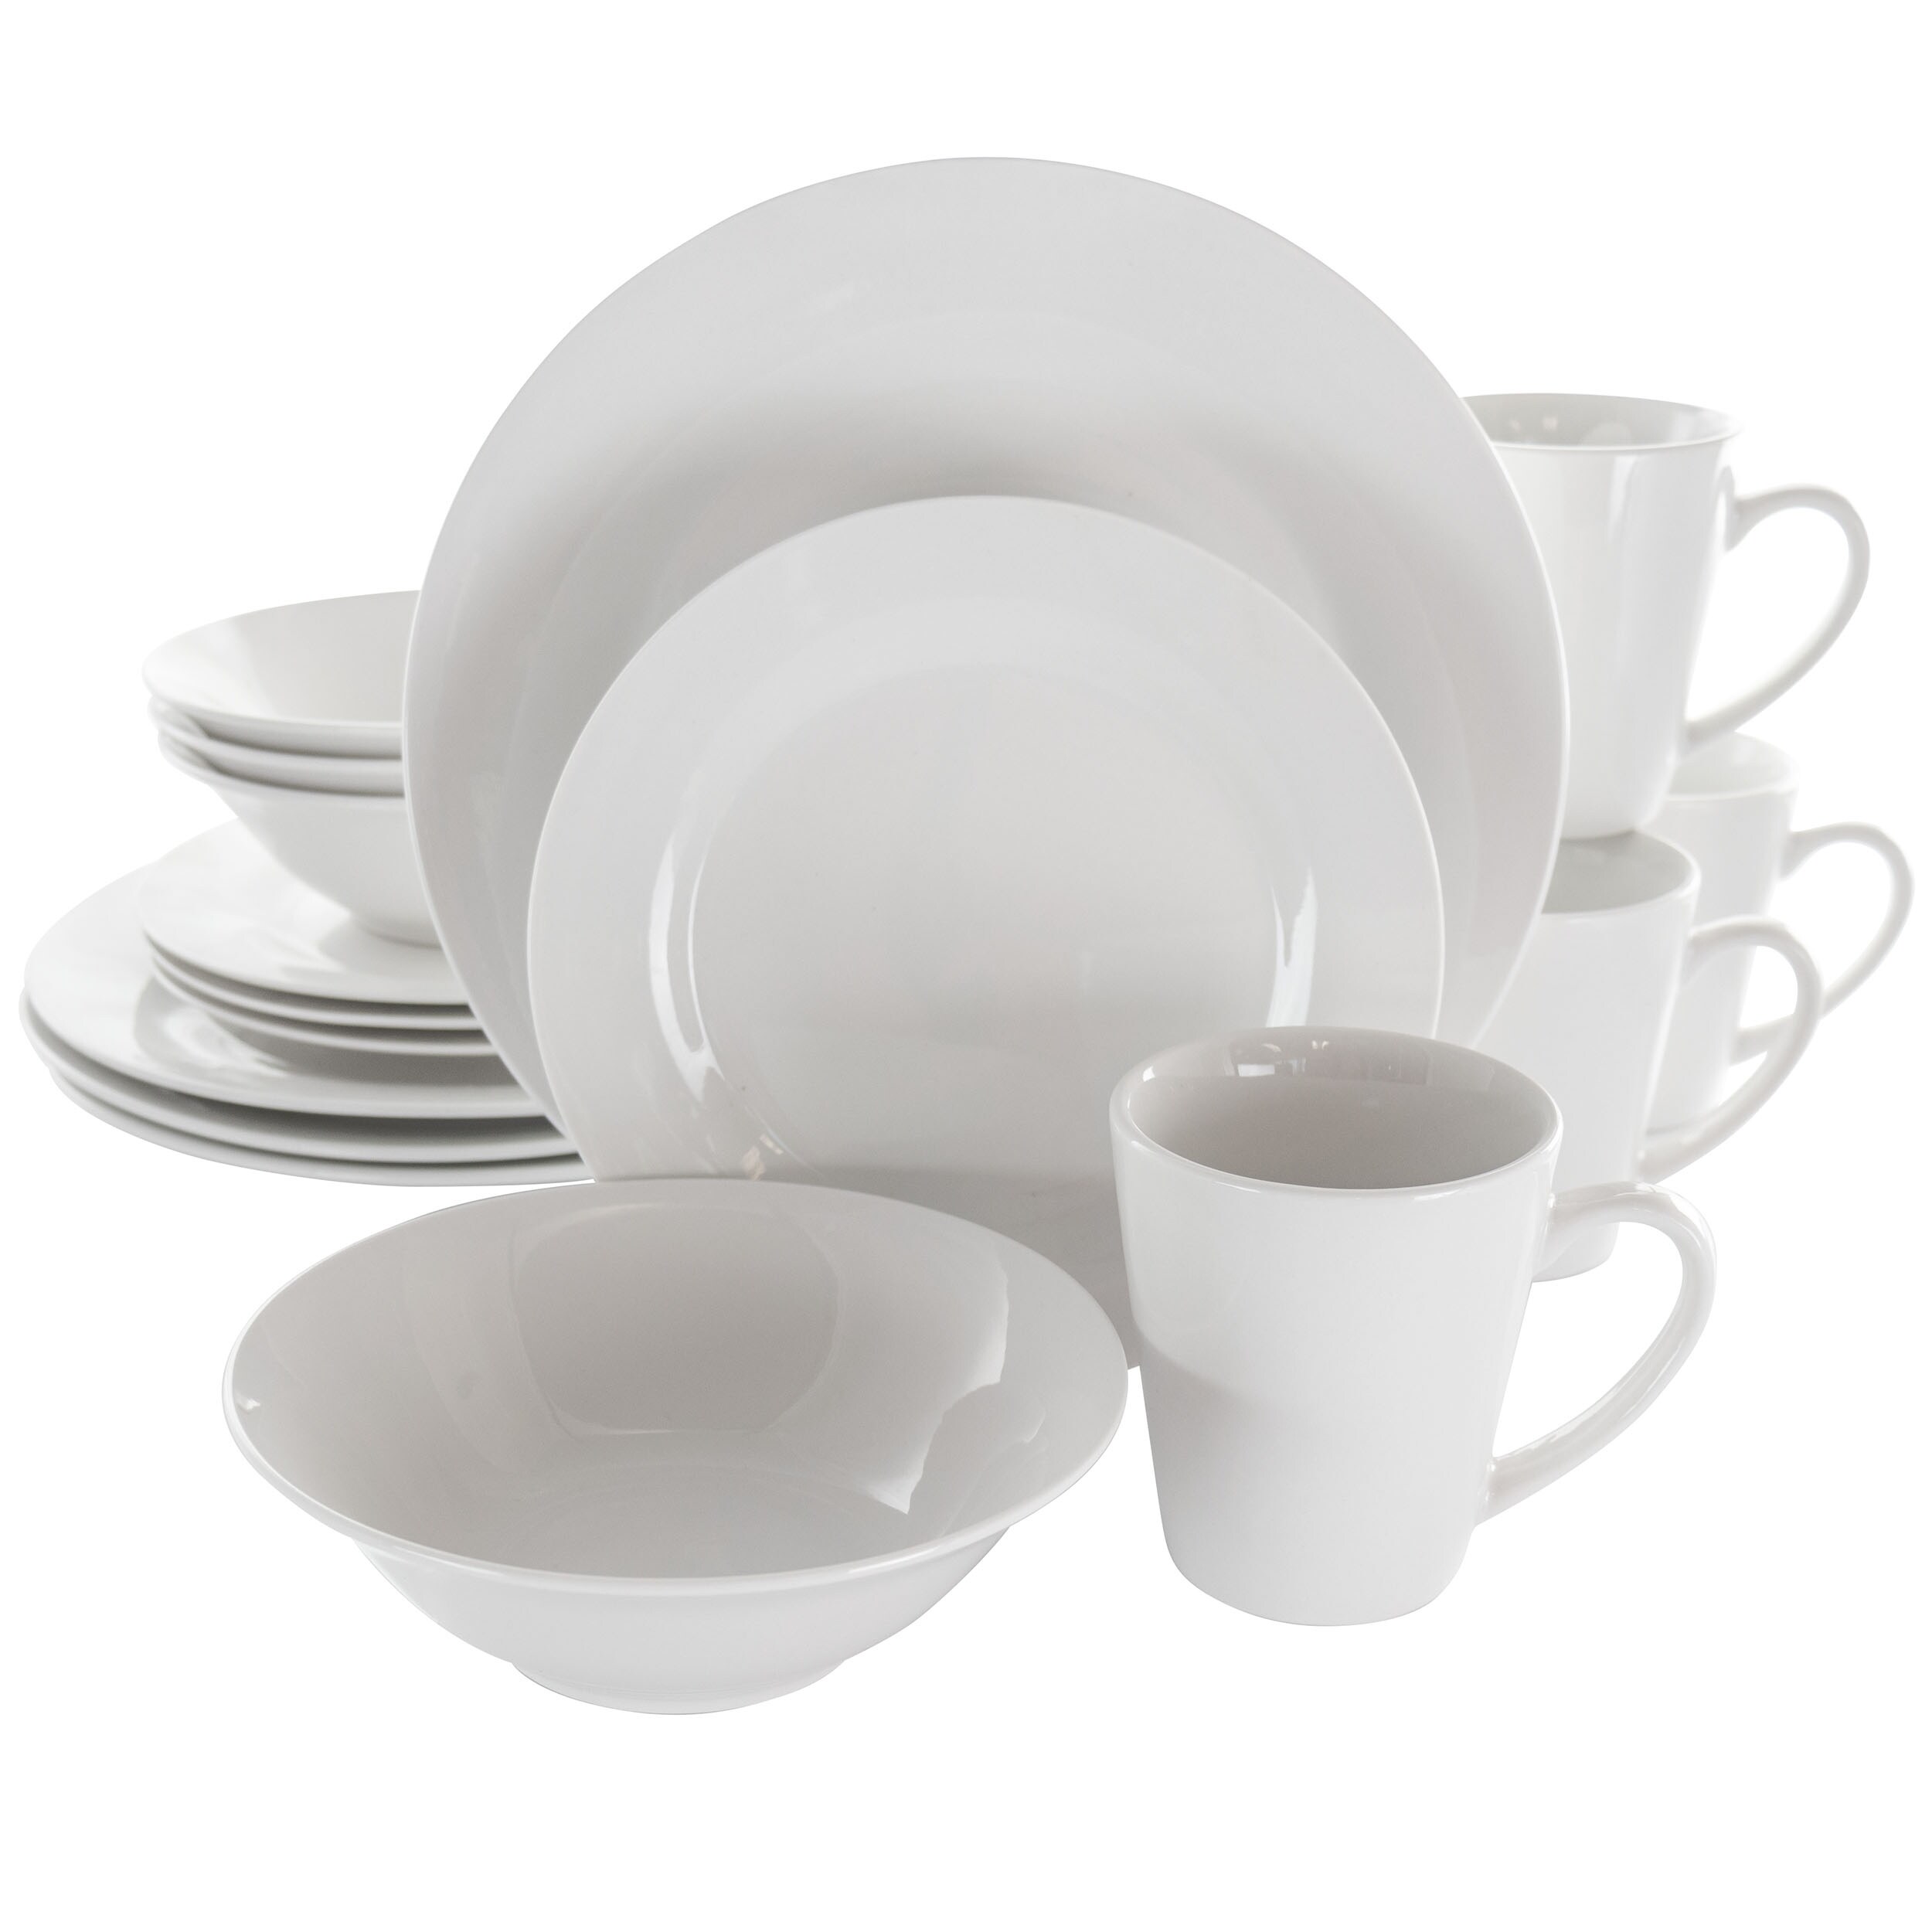 https://ak1.ostkcdn.com/images/products/is/images/direct/b5fc7ccfb45477b30bbeedbc55a4a172194b397e/Elama-Marshall-16-Piece-Porcelain-Dinnerware-Set-in-White.jpg